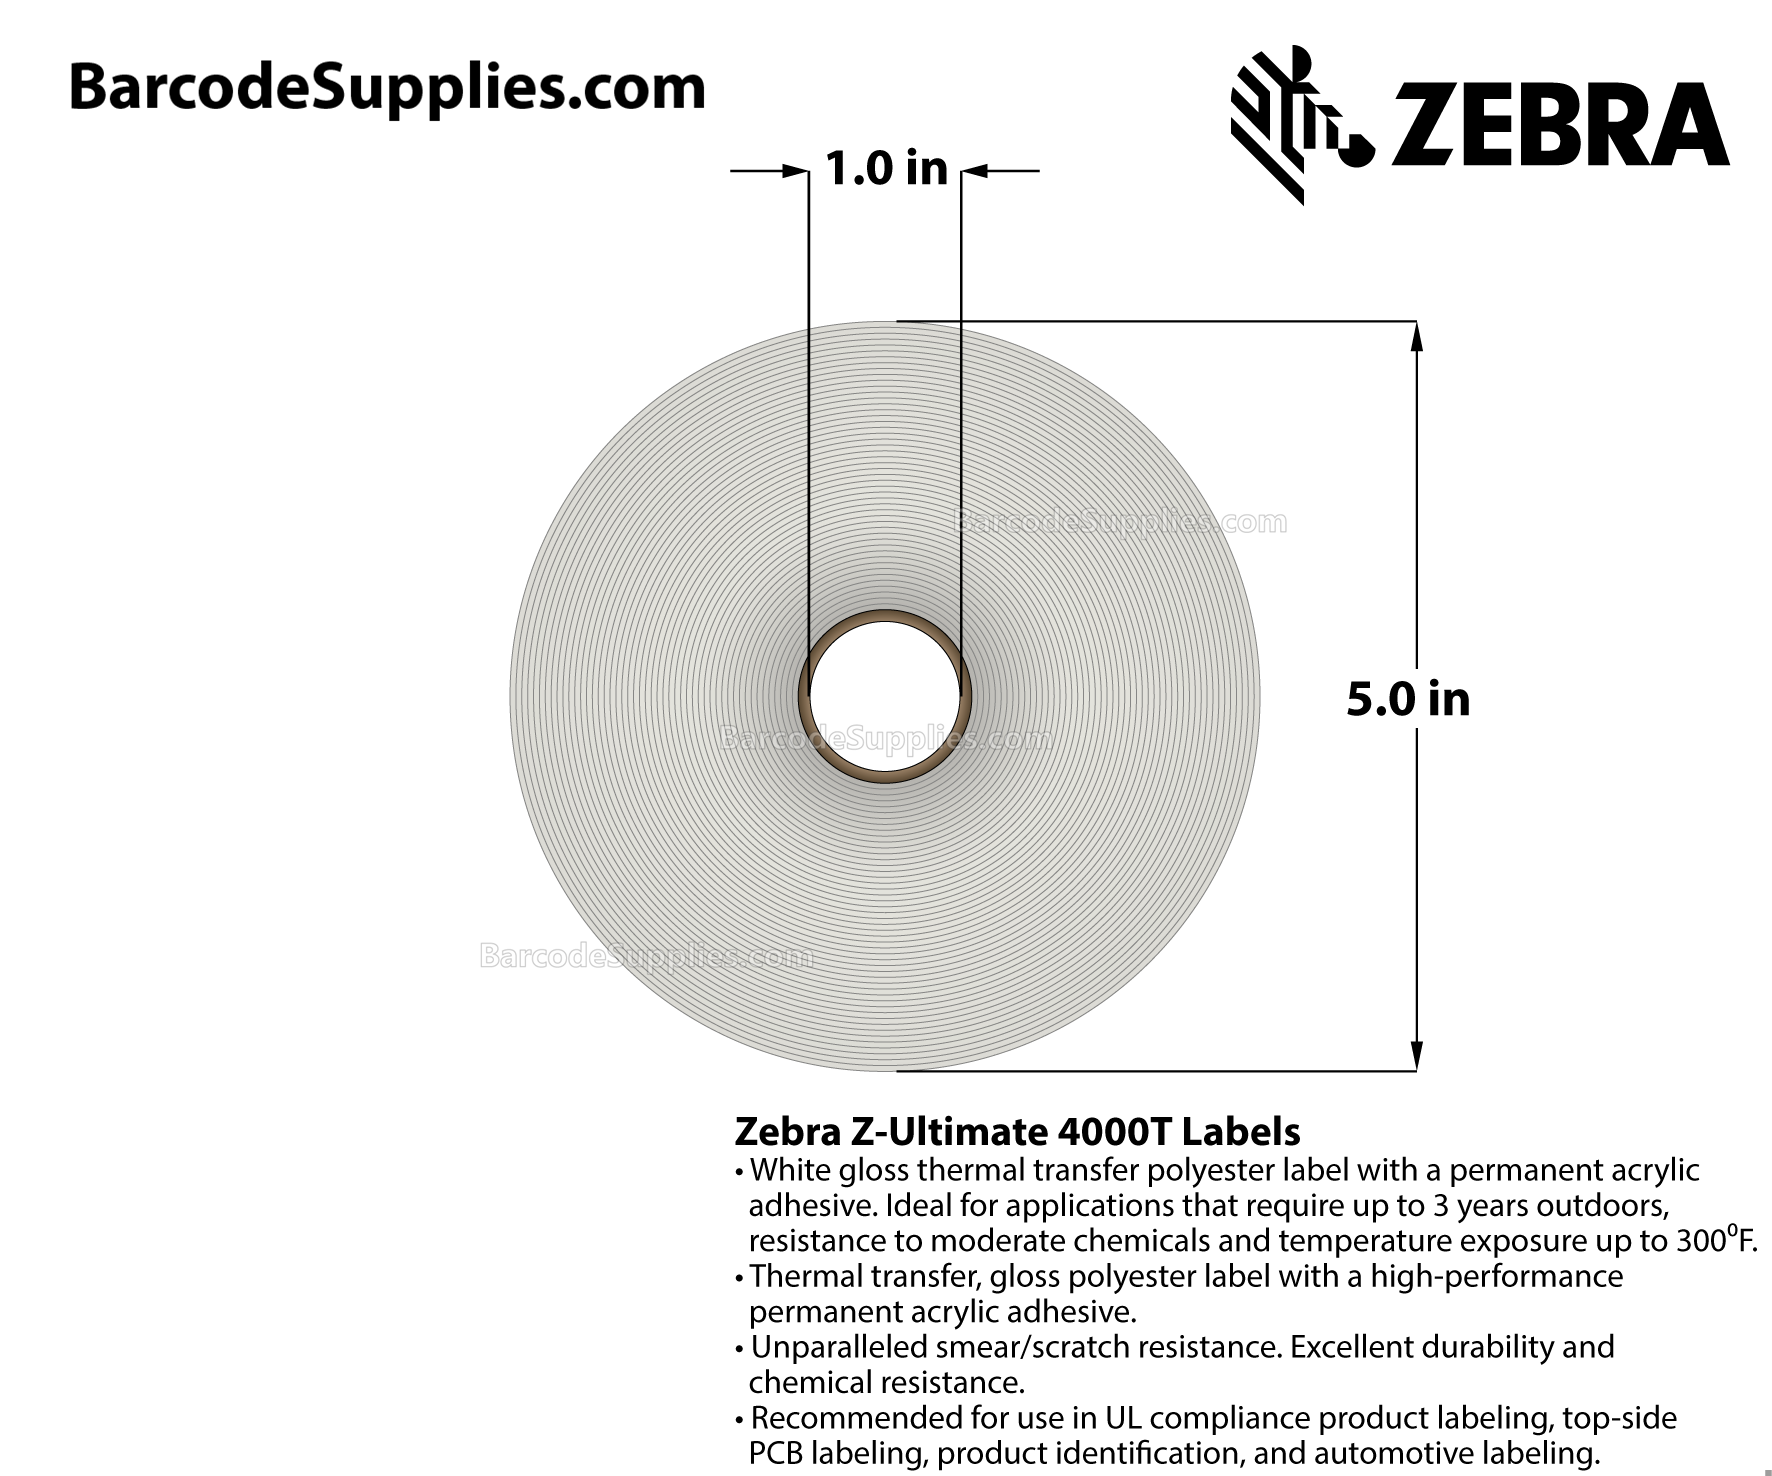 2 x 1 Thermal Transfer White Z-Ultimate 4000T Labels With Permanent Adhesive - Perforated - 2530 Labels Per Roll - Carton Of 8 Rolls - 20240 Labels Total - MPN: 10002629